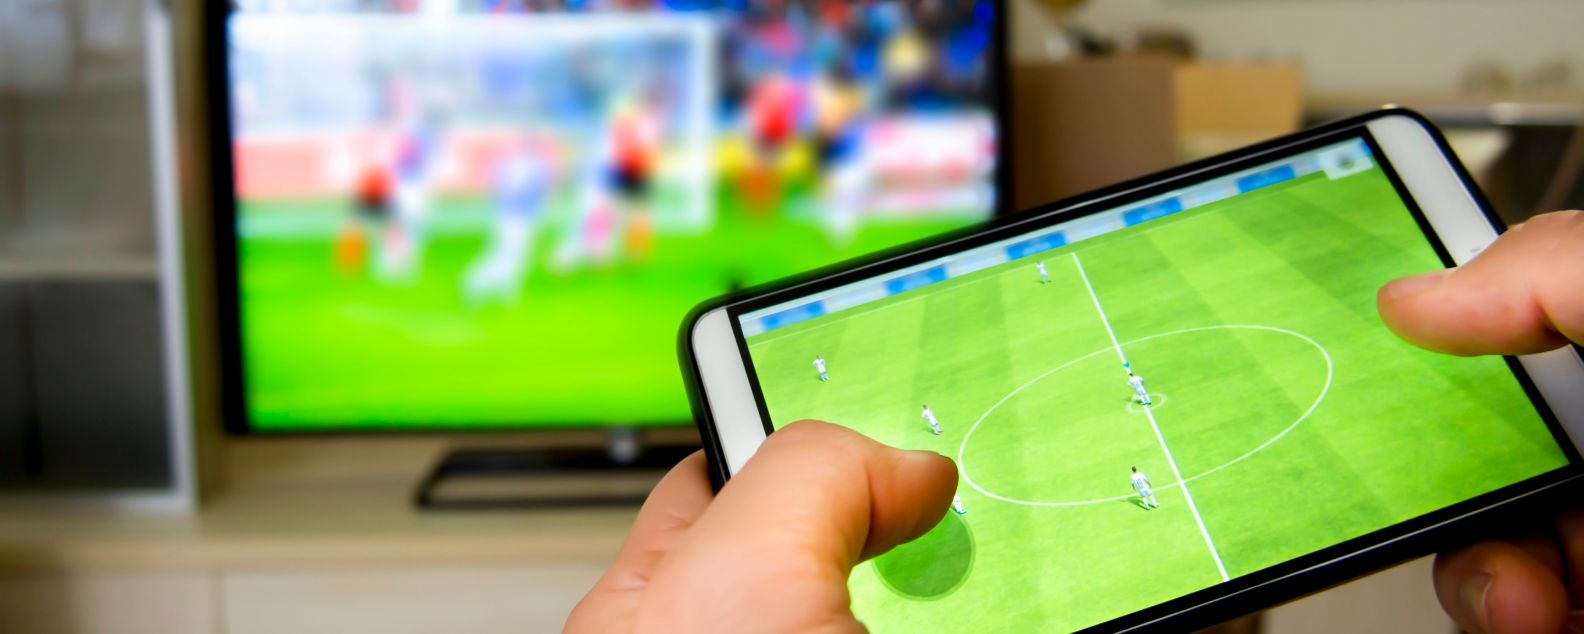 Person interacting with a soccer game on a mobile device while watching a game on TV